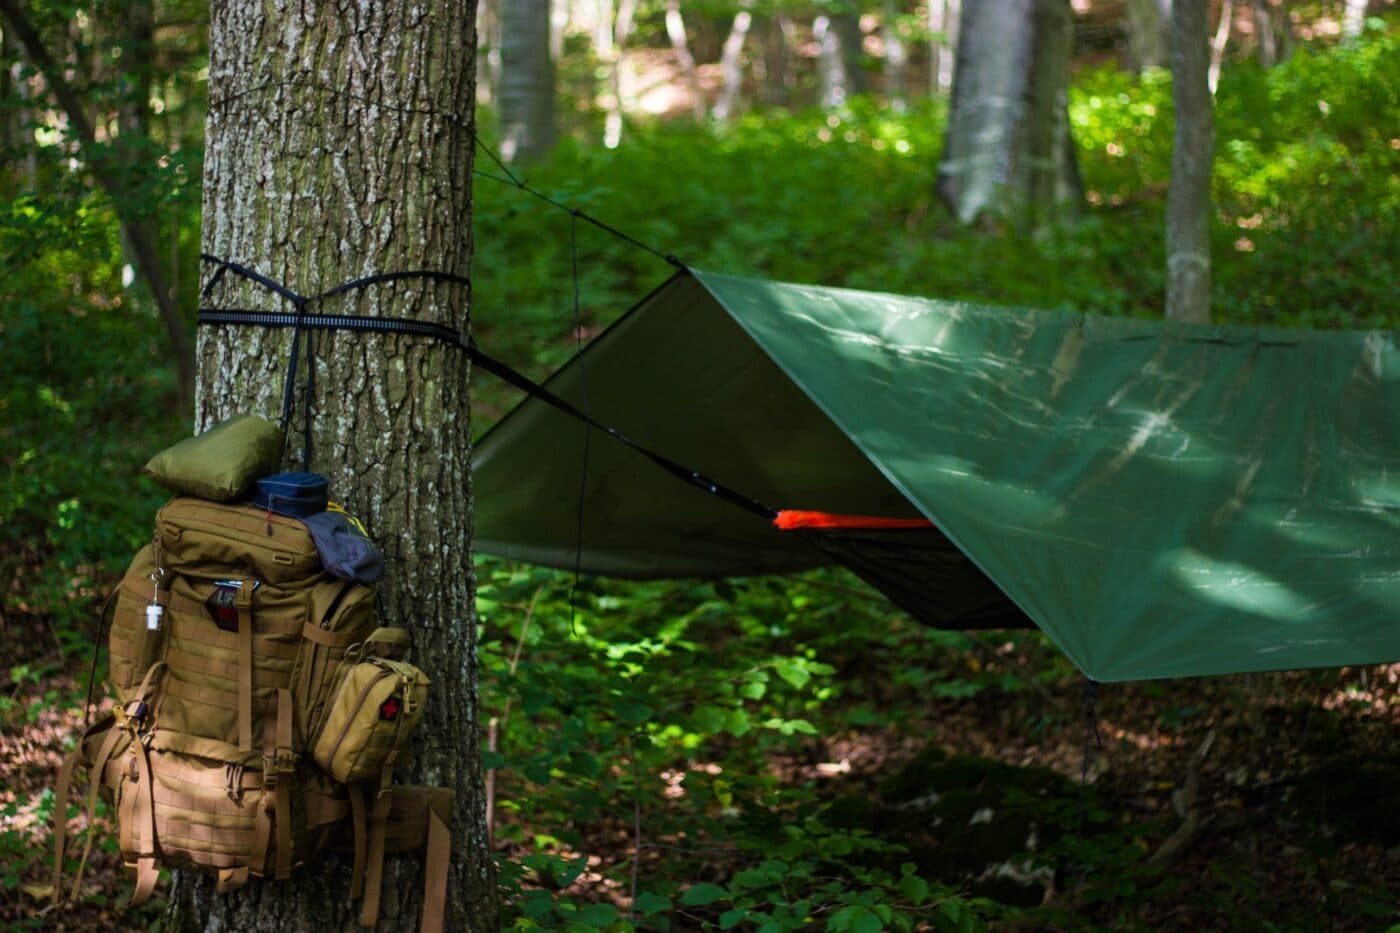 Survival gear set up in the woods